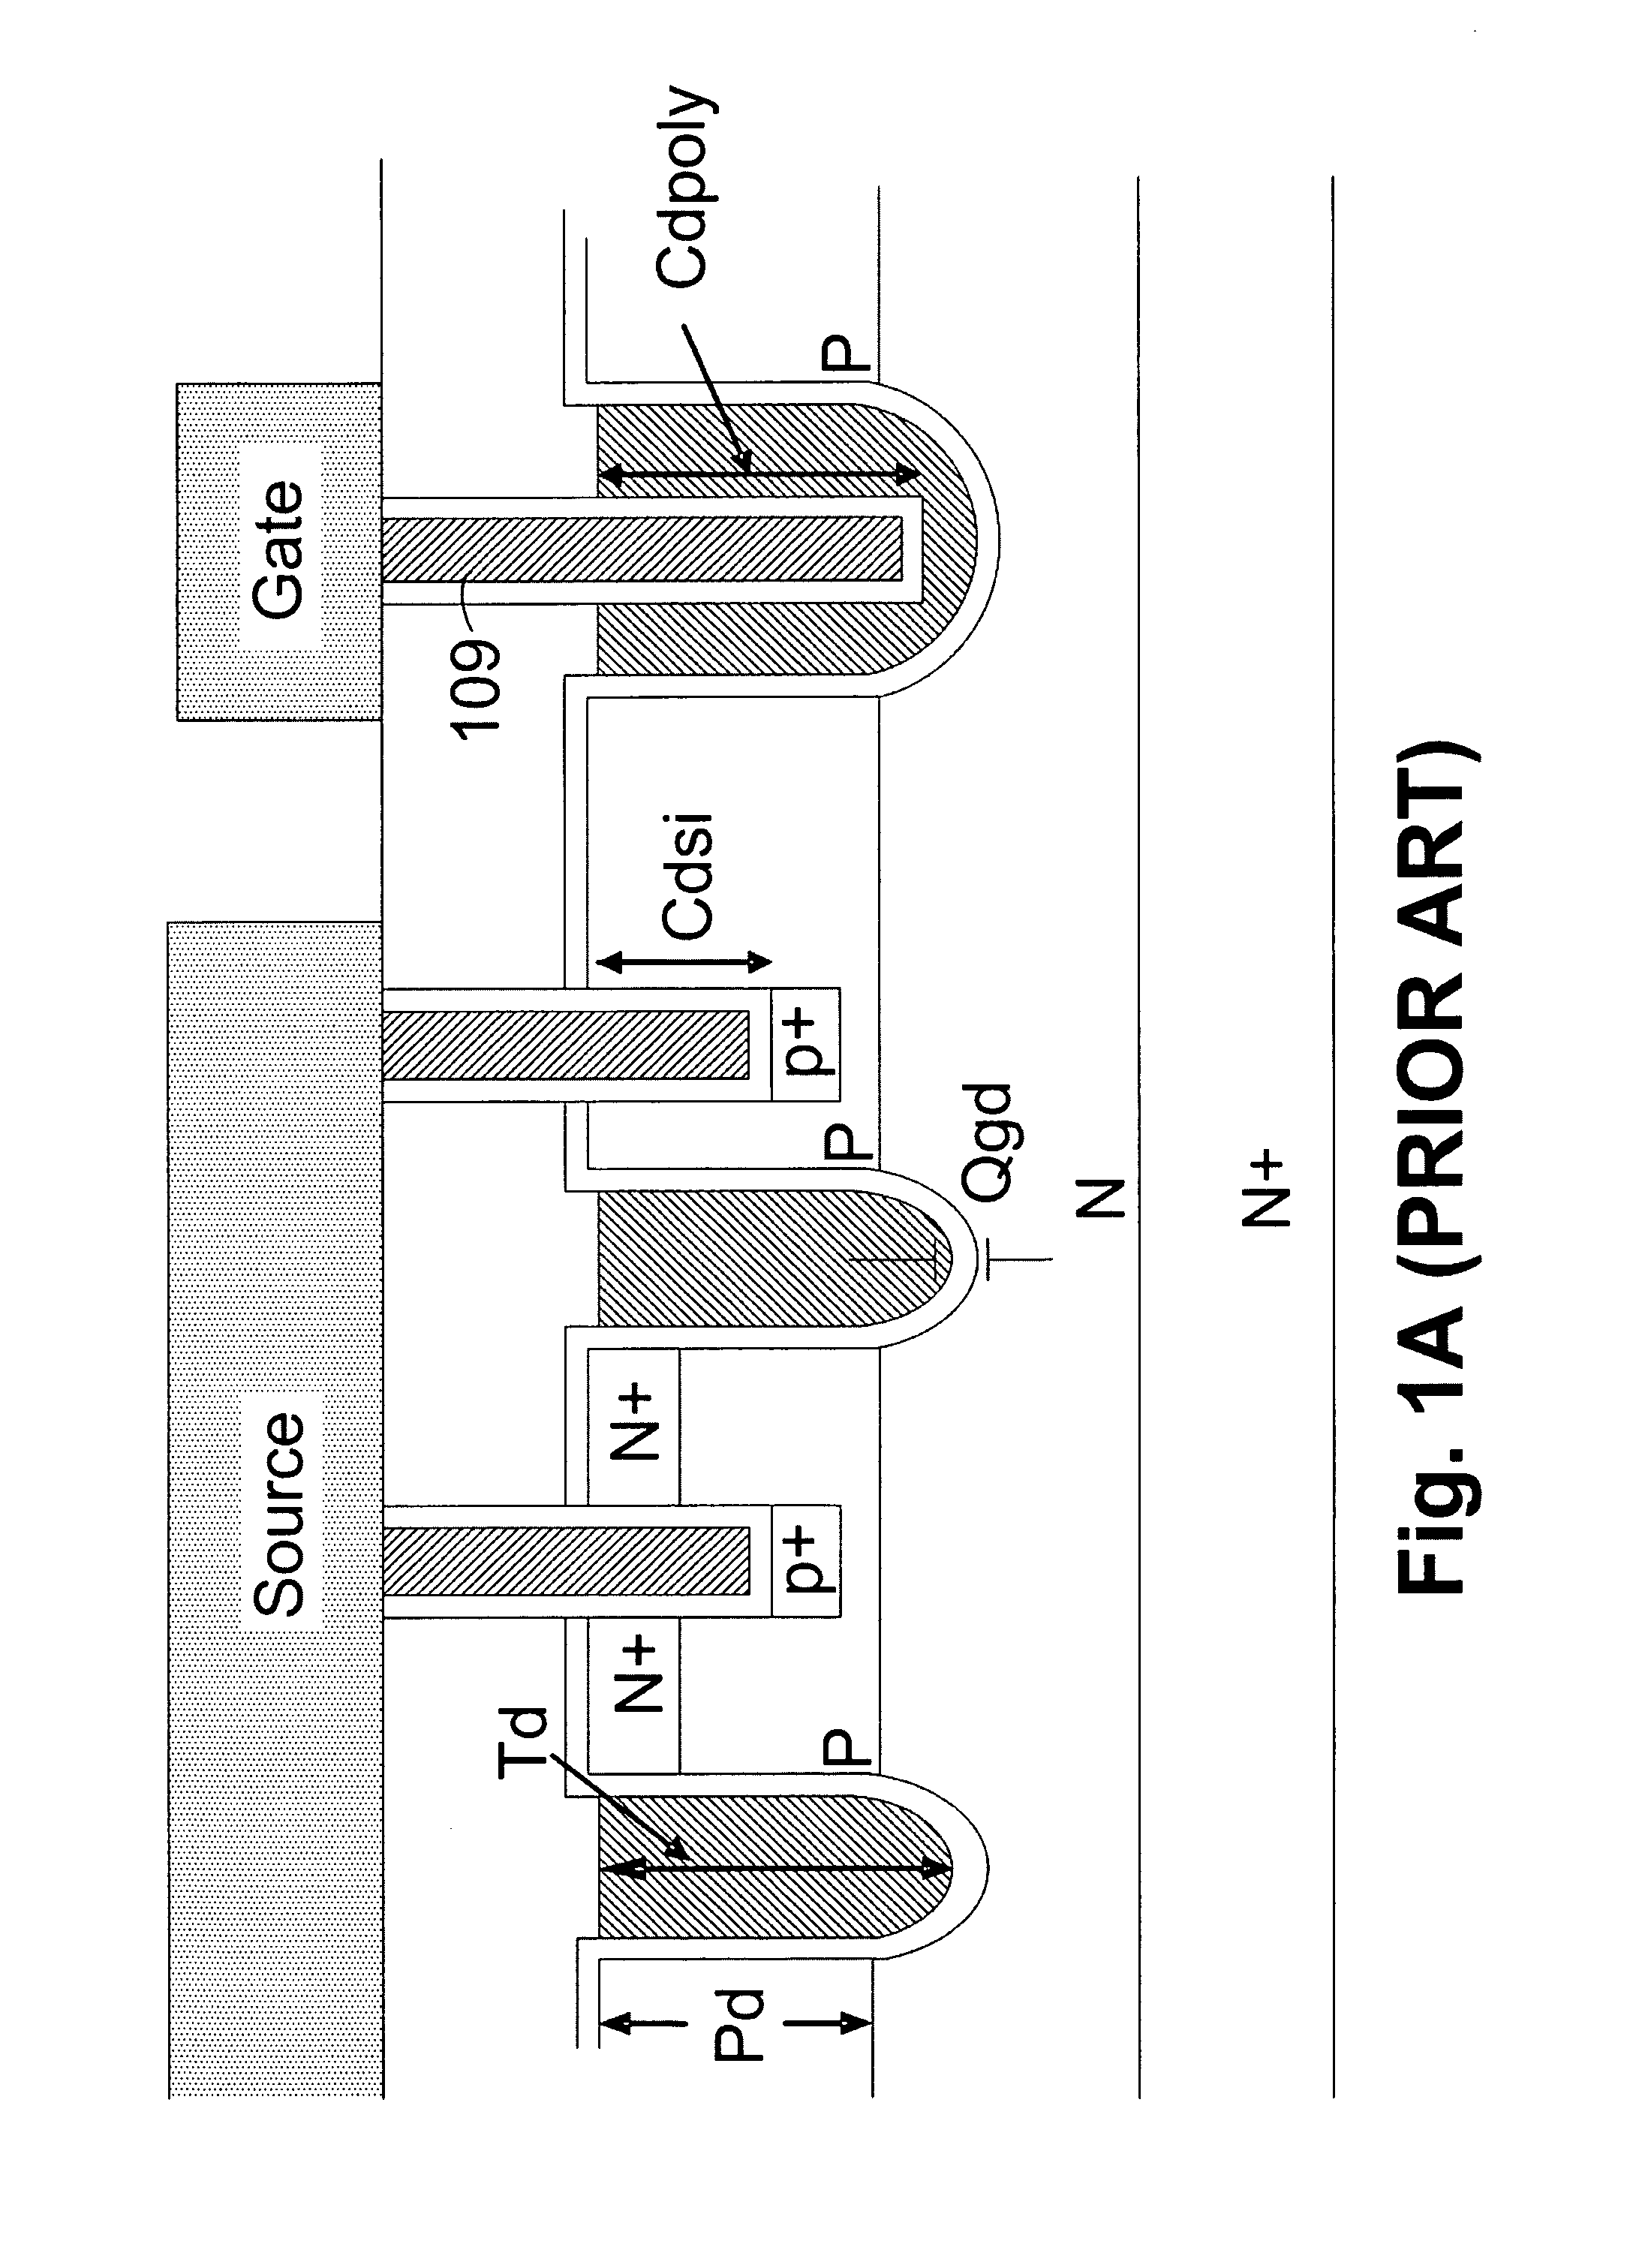 Method for making trench MOSFET with shallow trench structures